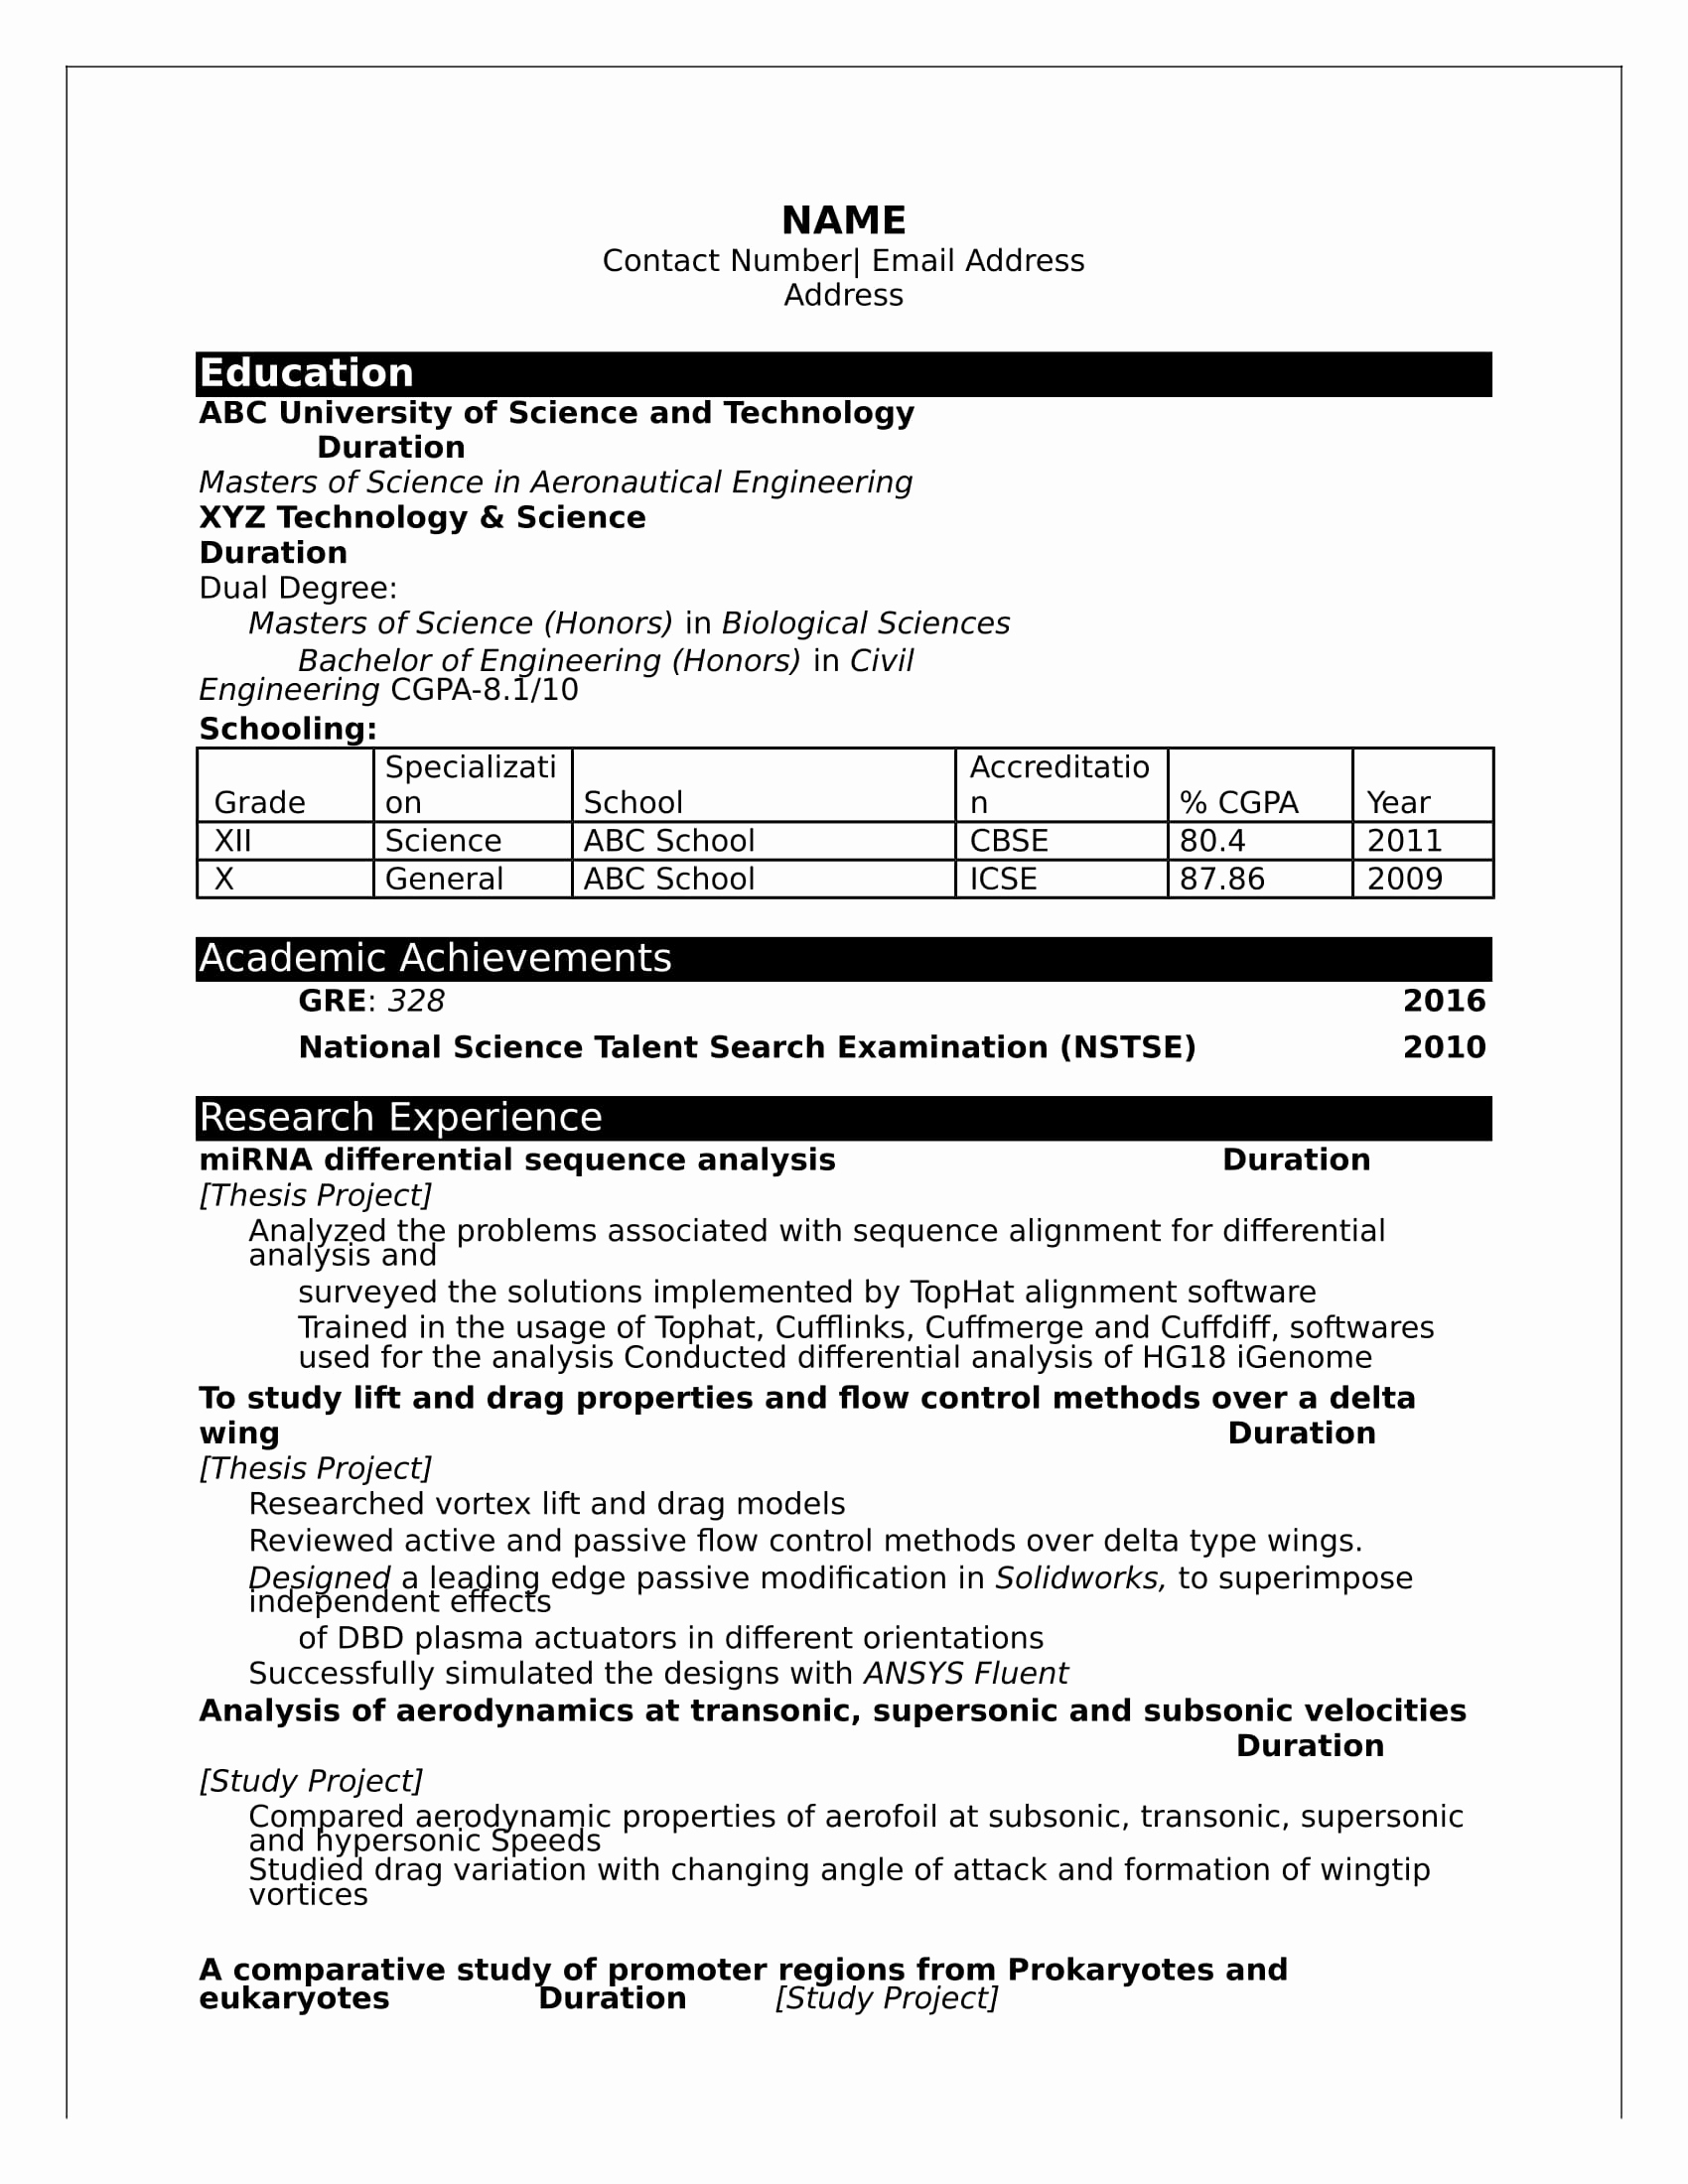 Resume Samples for Freshers Unique 32 Resume Templates for Freshers Download Free Word format